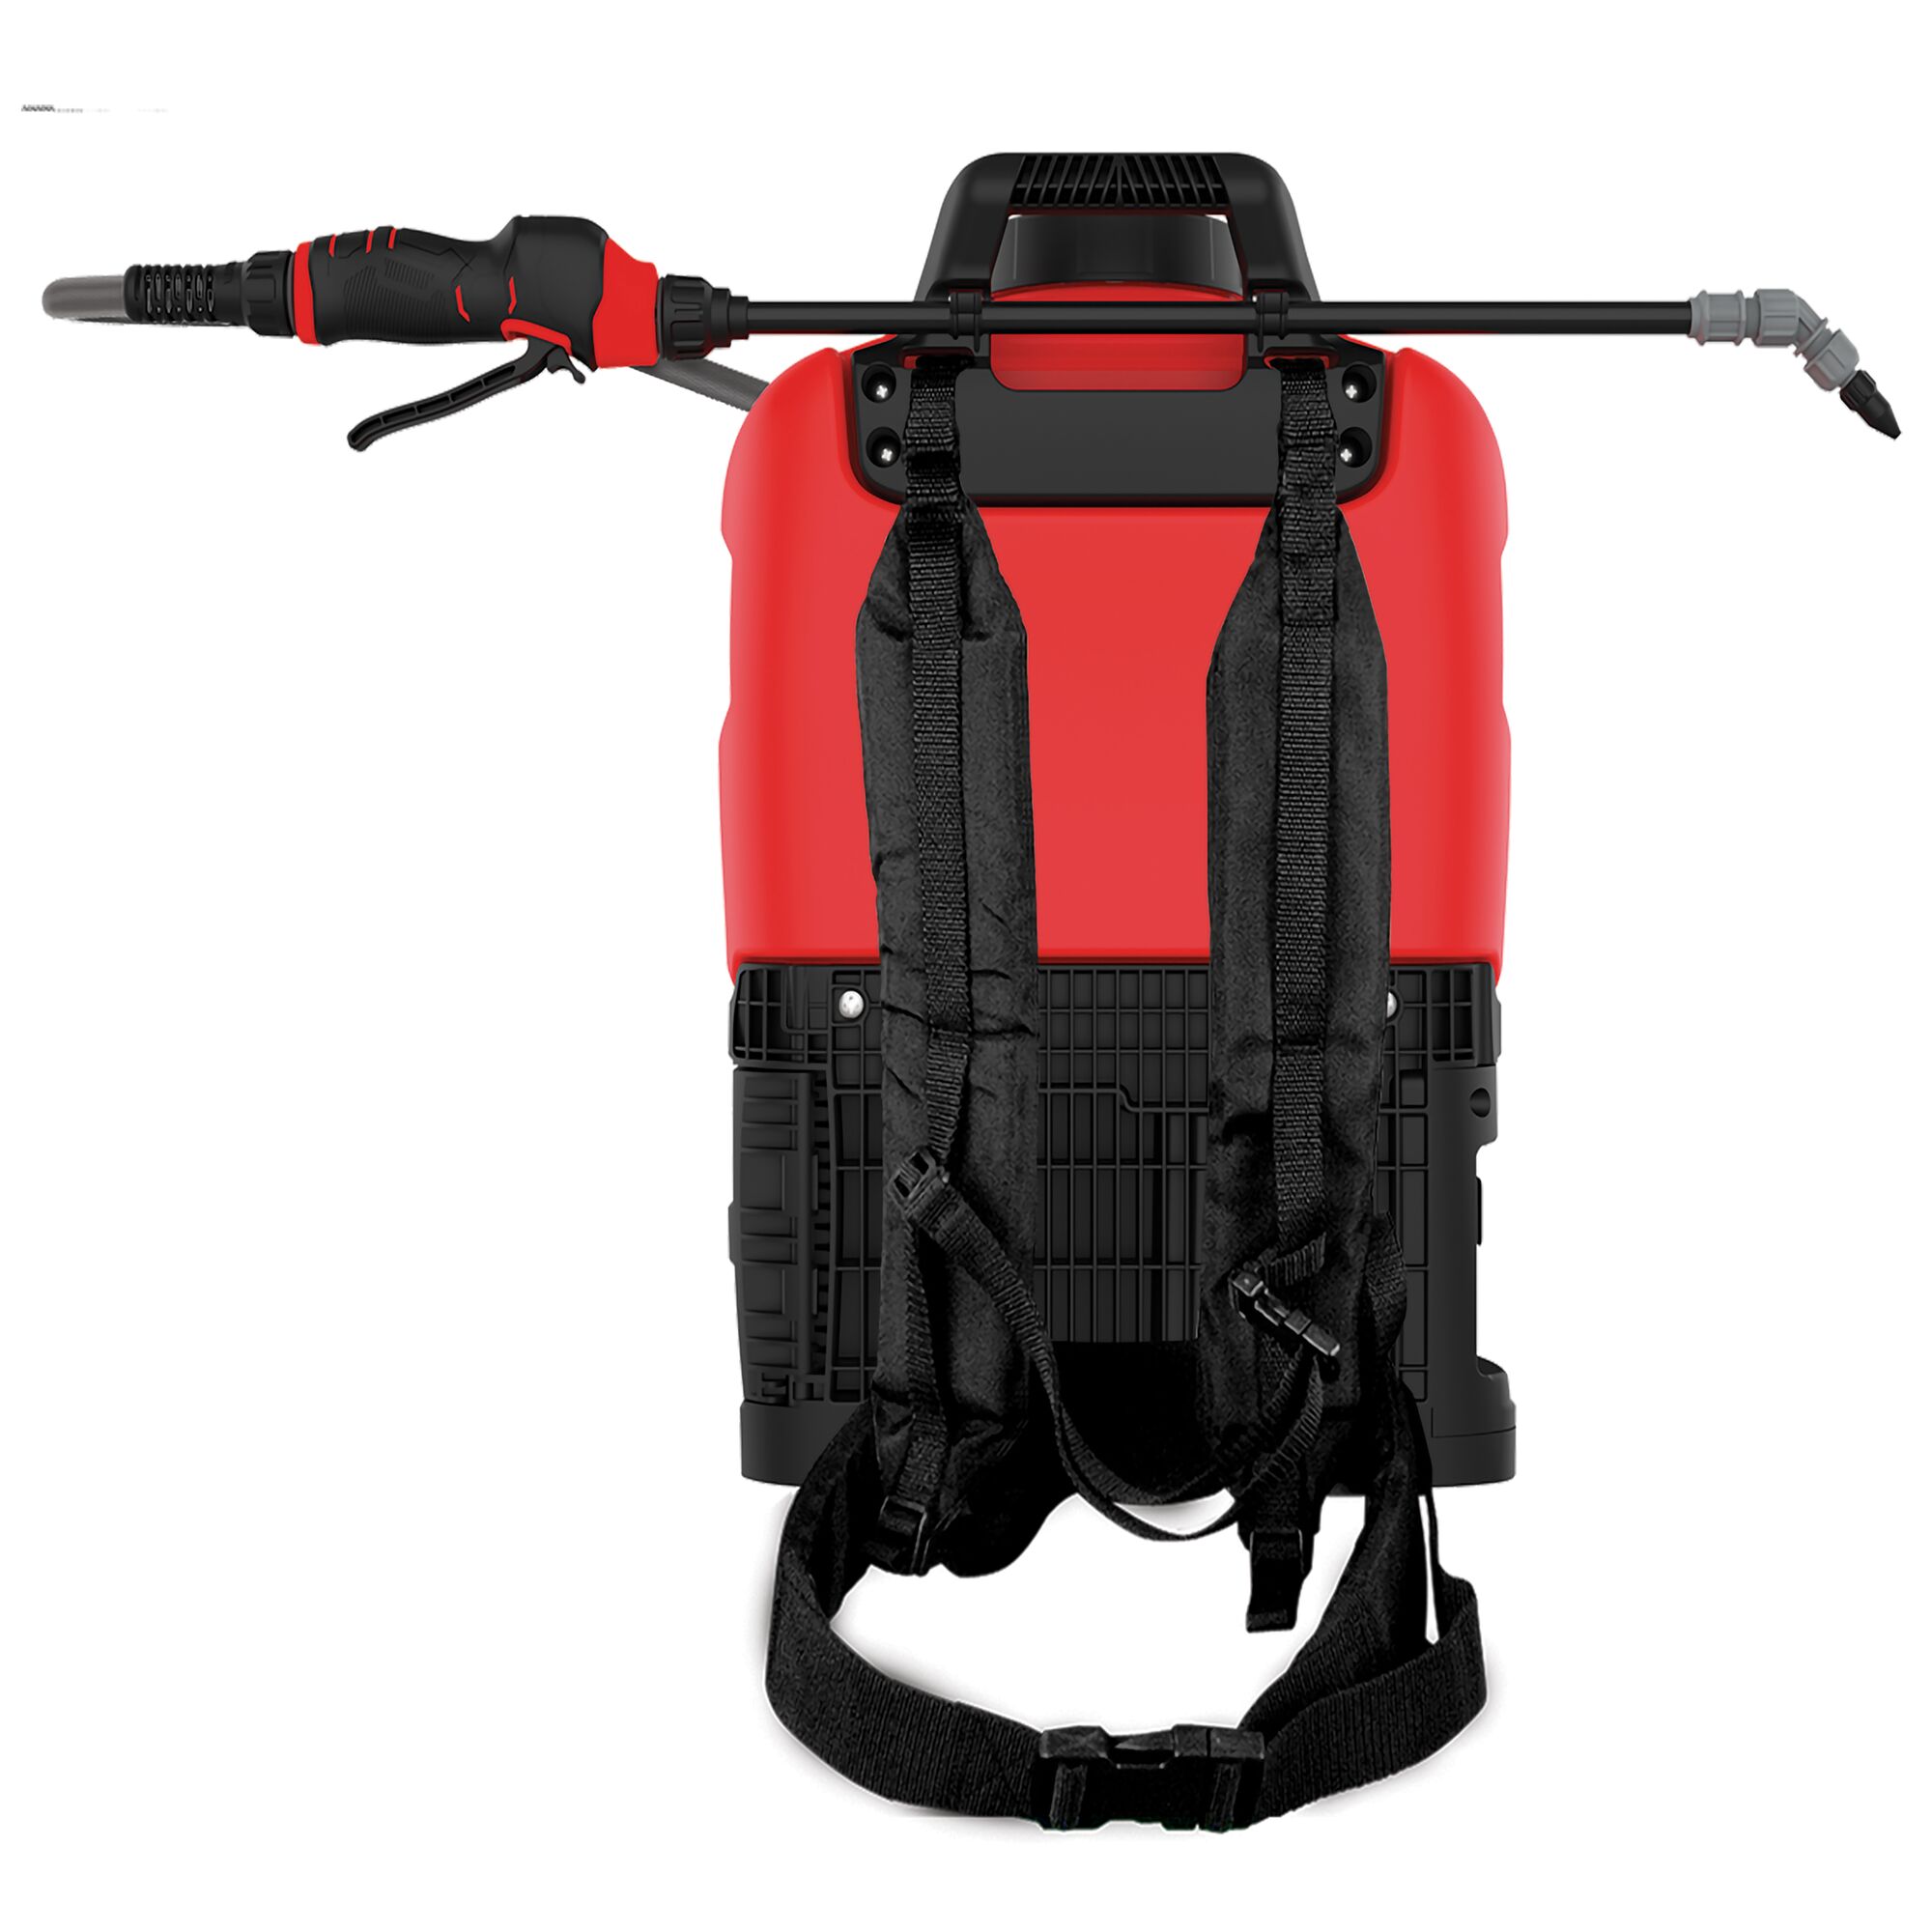 4 Gallon CRAFTSMAN 20V Battery Powered Backpack Sprayer Padded shoulder harness with waistbelt for all day comfort.